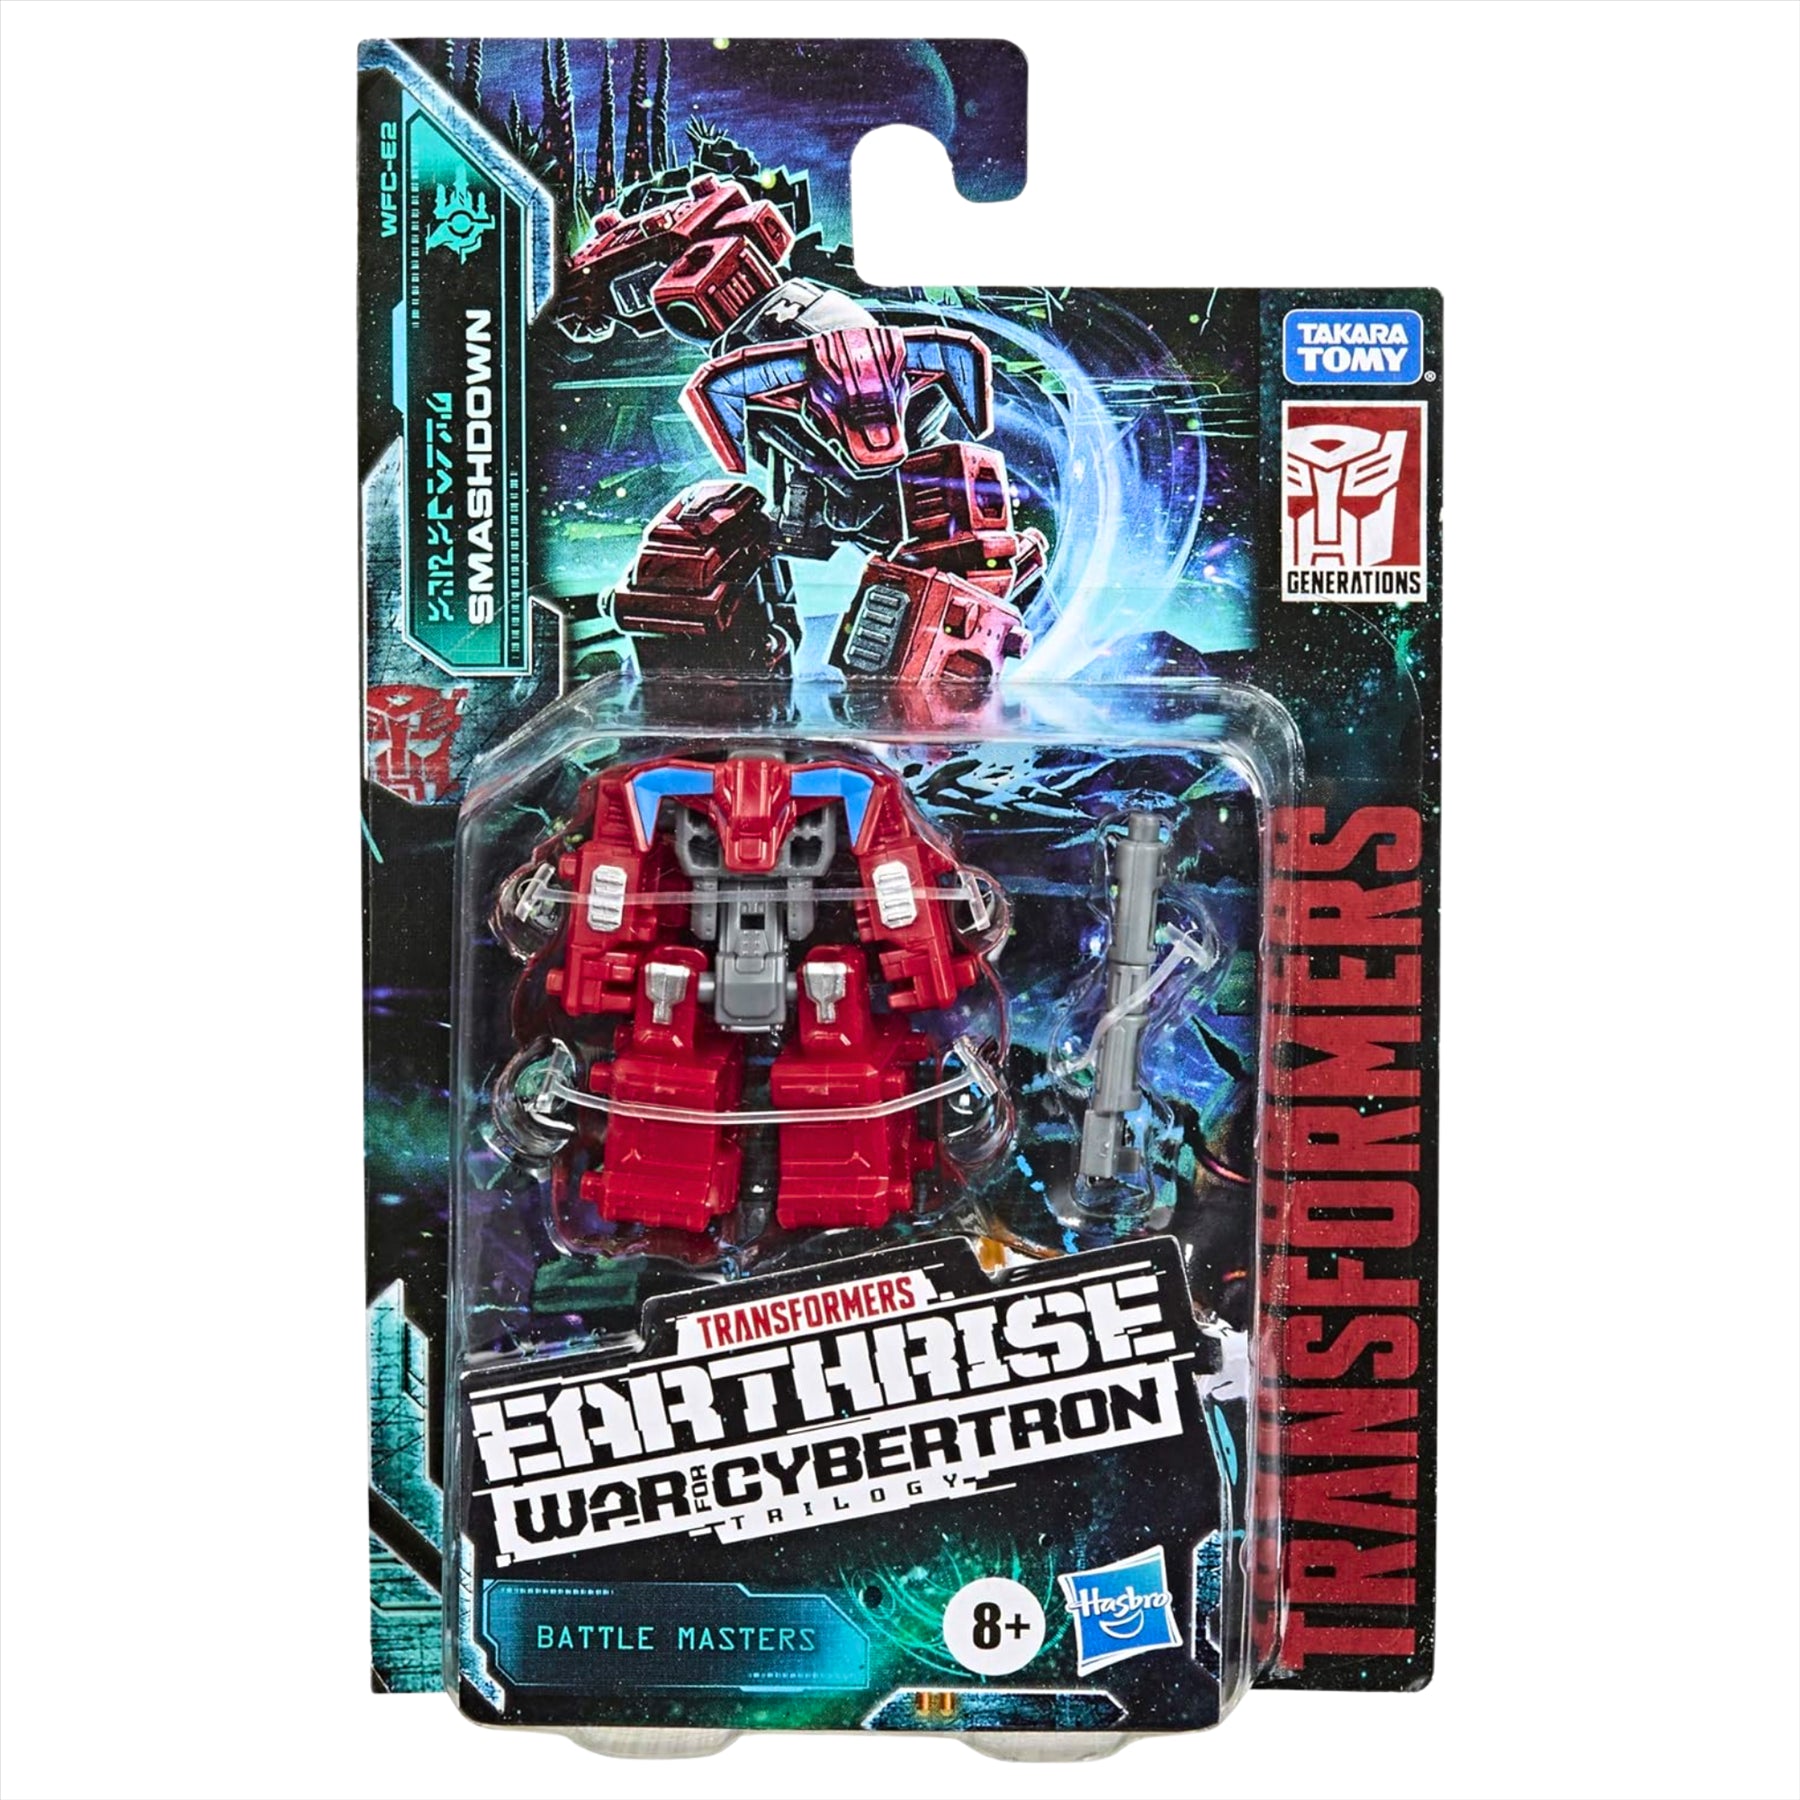 Transformers Earthrise War for Cybertron Smashdown 5cm Articulated Action Figure Toy with Accessory - Toptoys2u